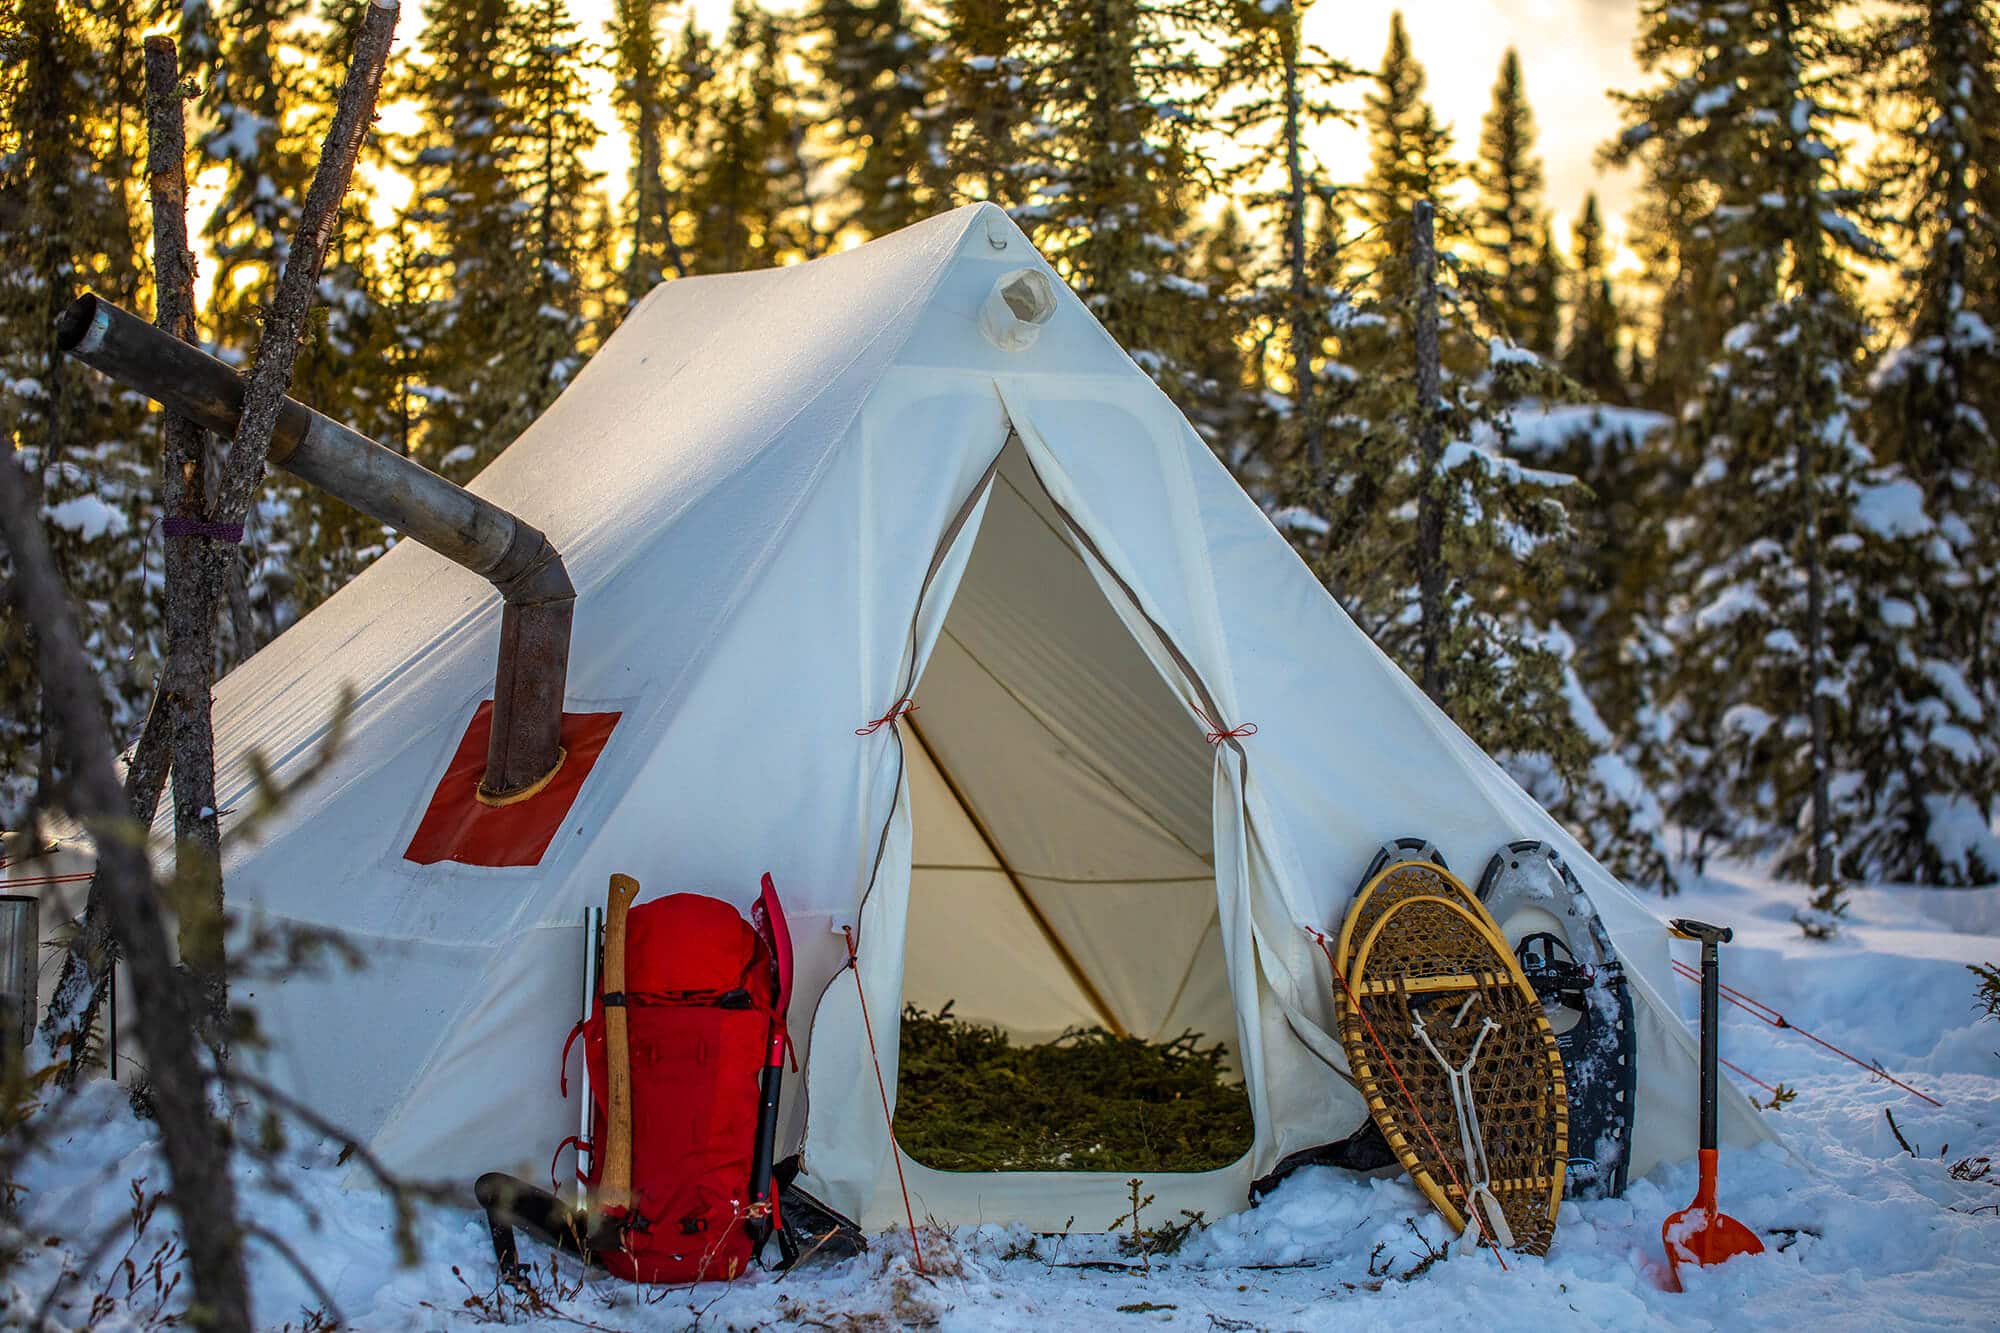 A Tent With Stove Jack May Sound Extreme At First But You’ll Love It.